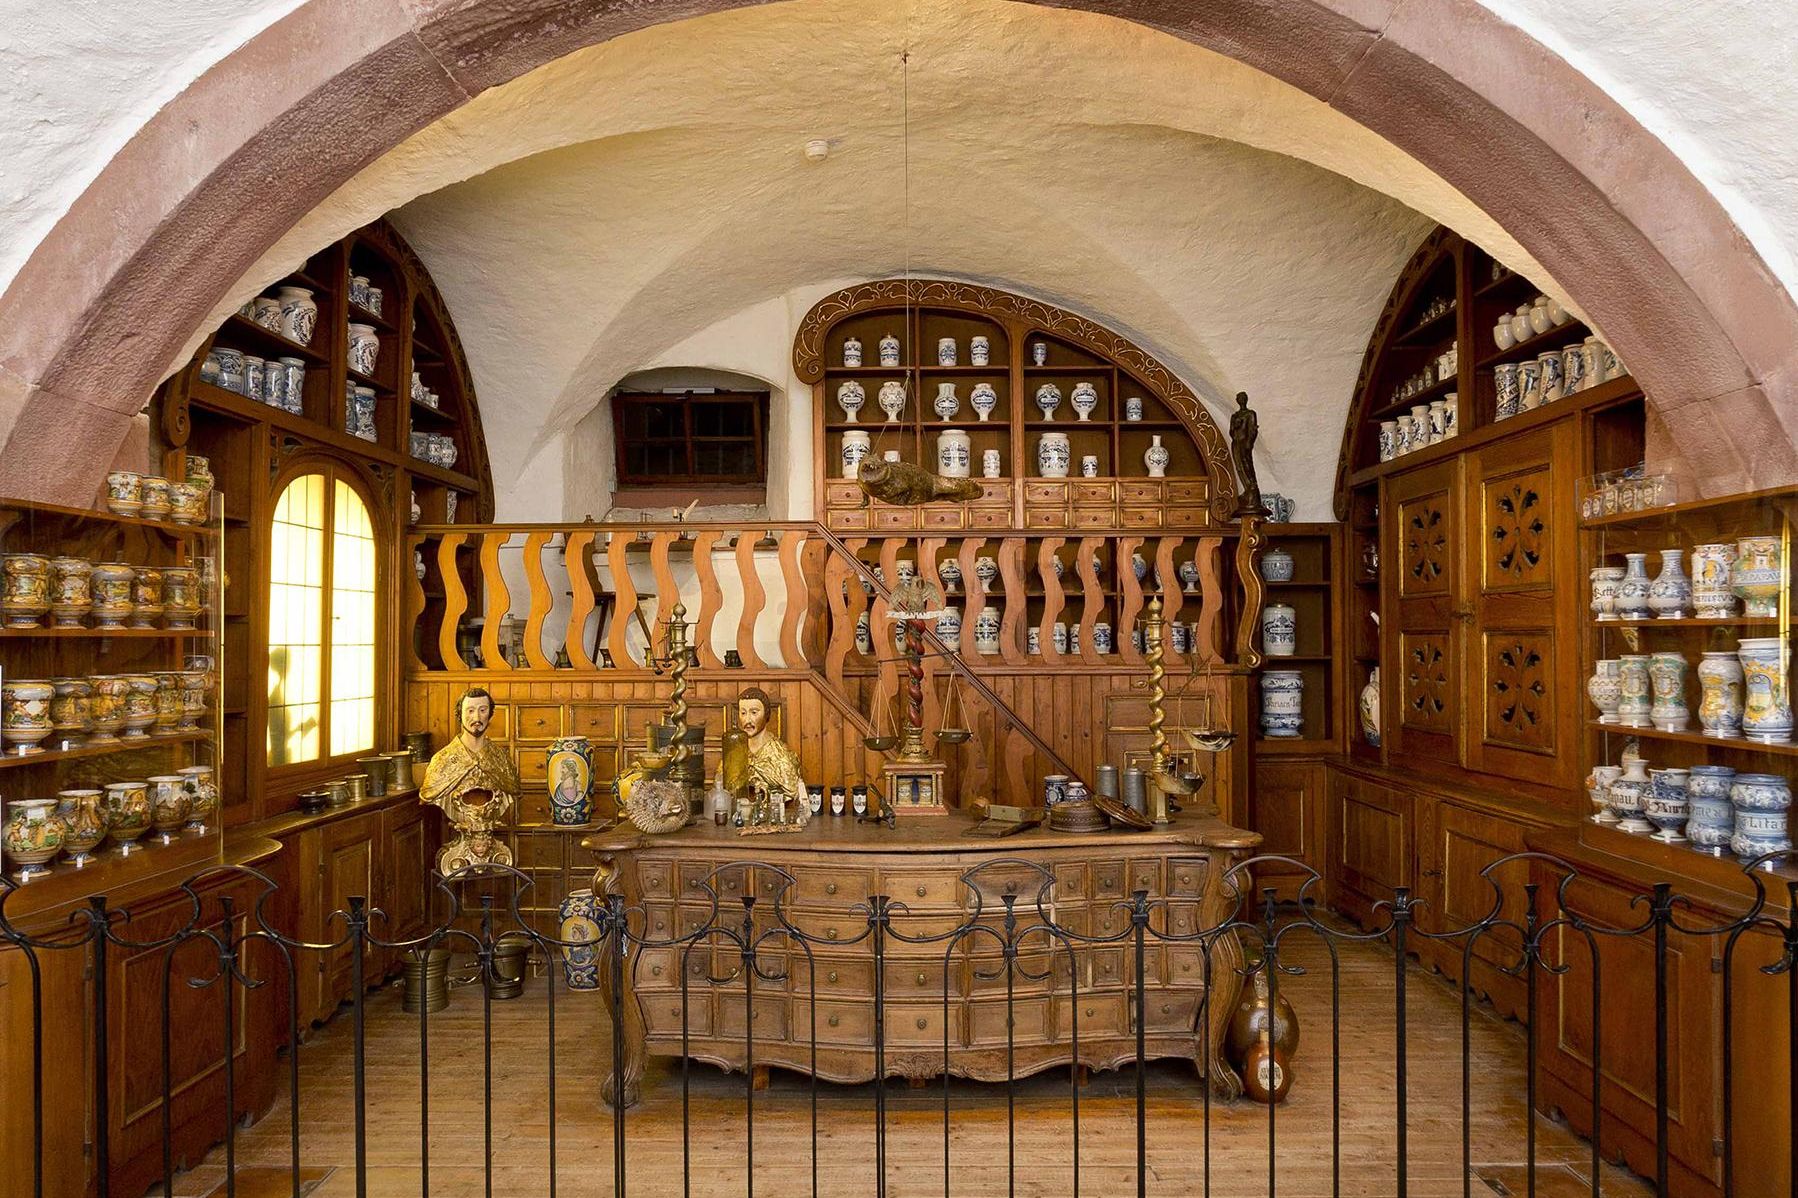 German Apothecary Museum, Offizin